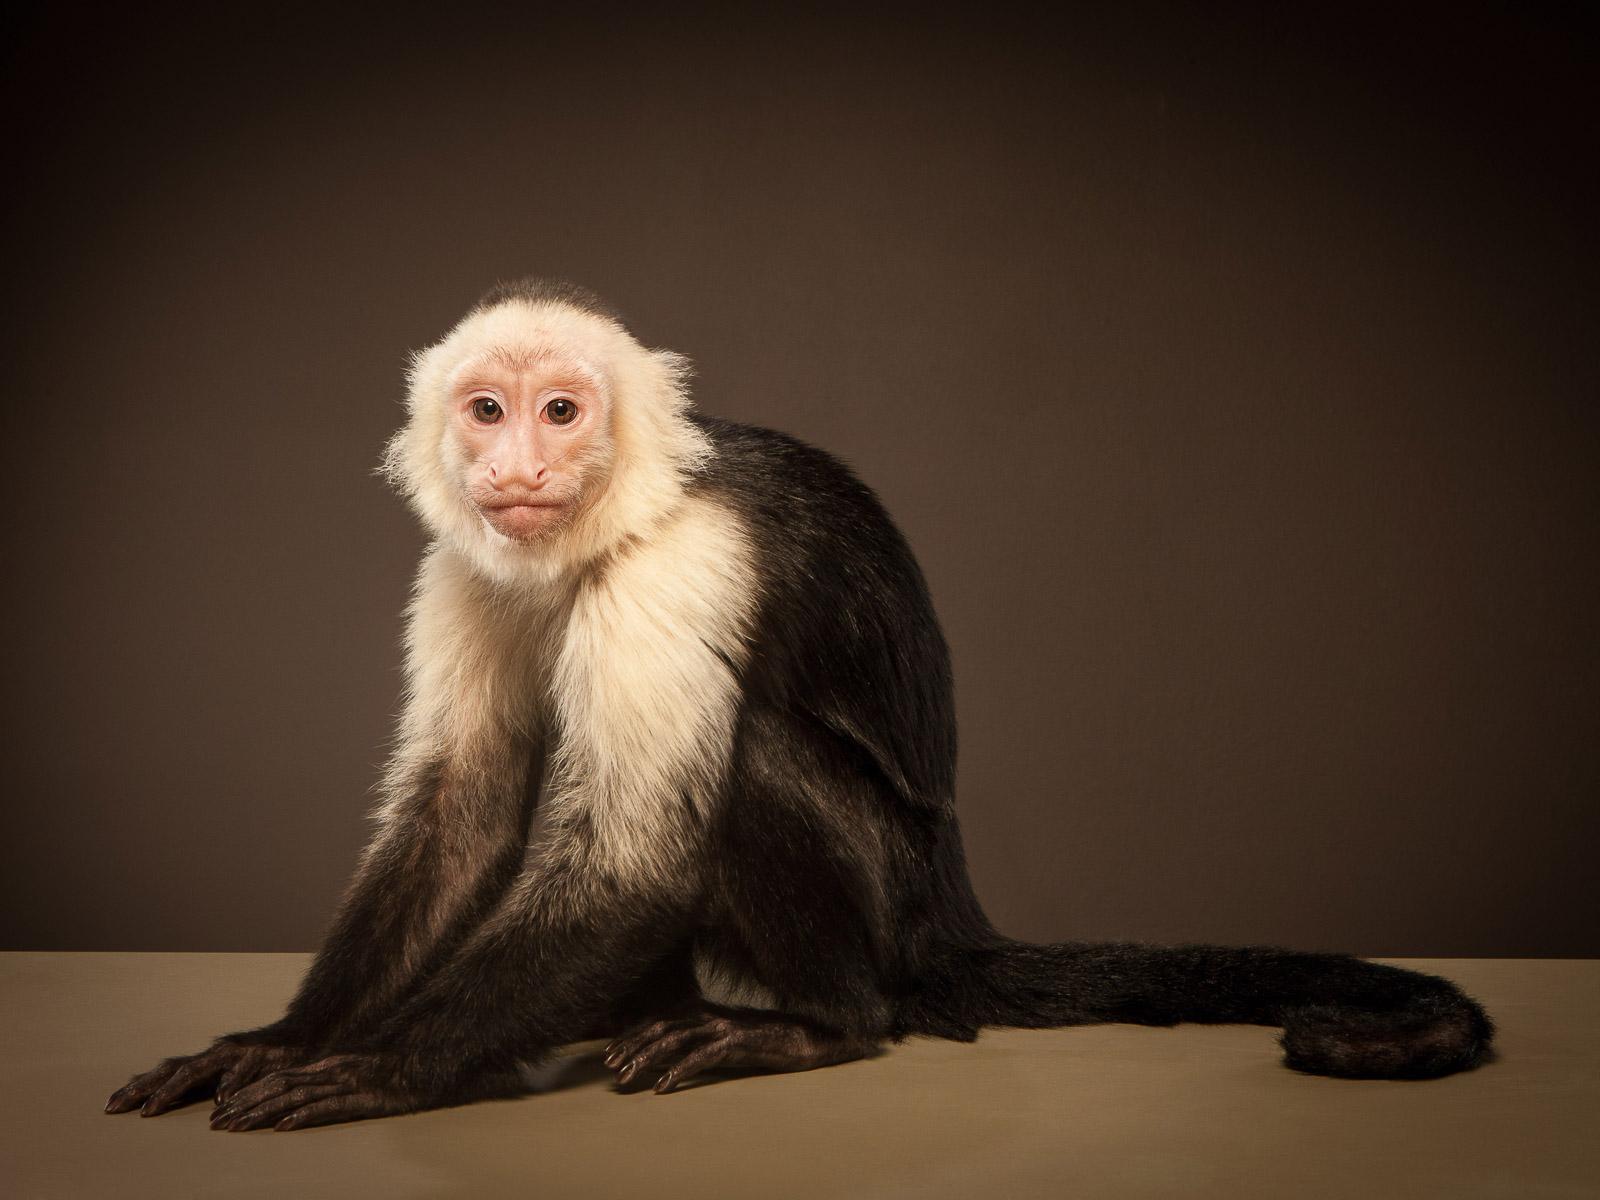 Capuchin 1 , Signed limited edition animal fine art print, brown and white monkey